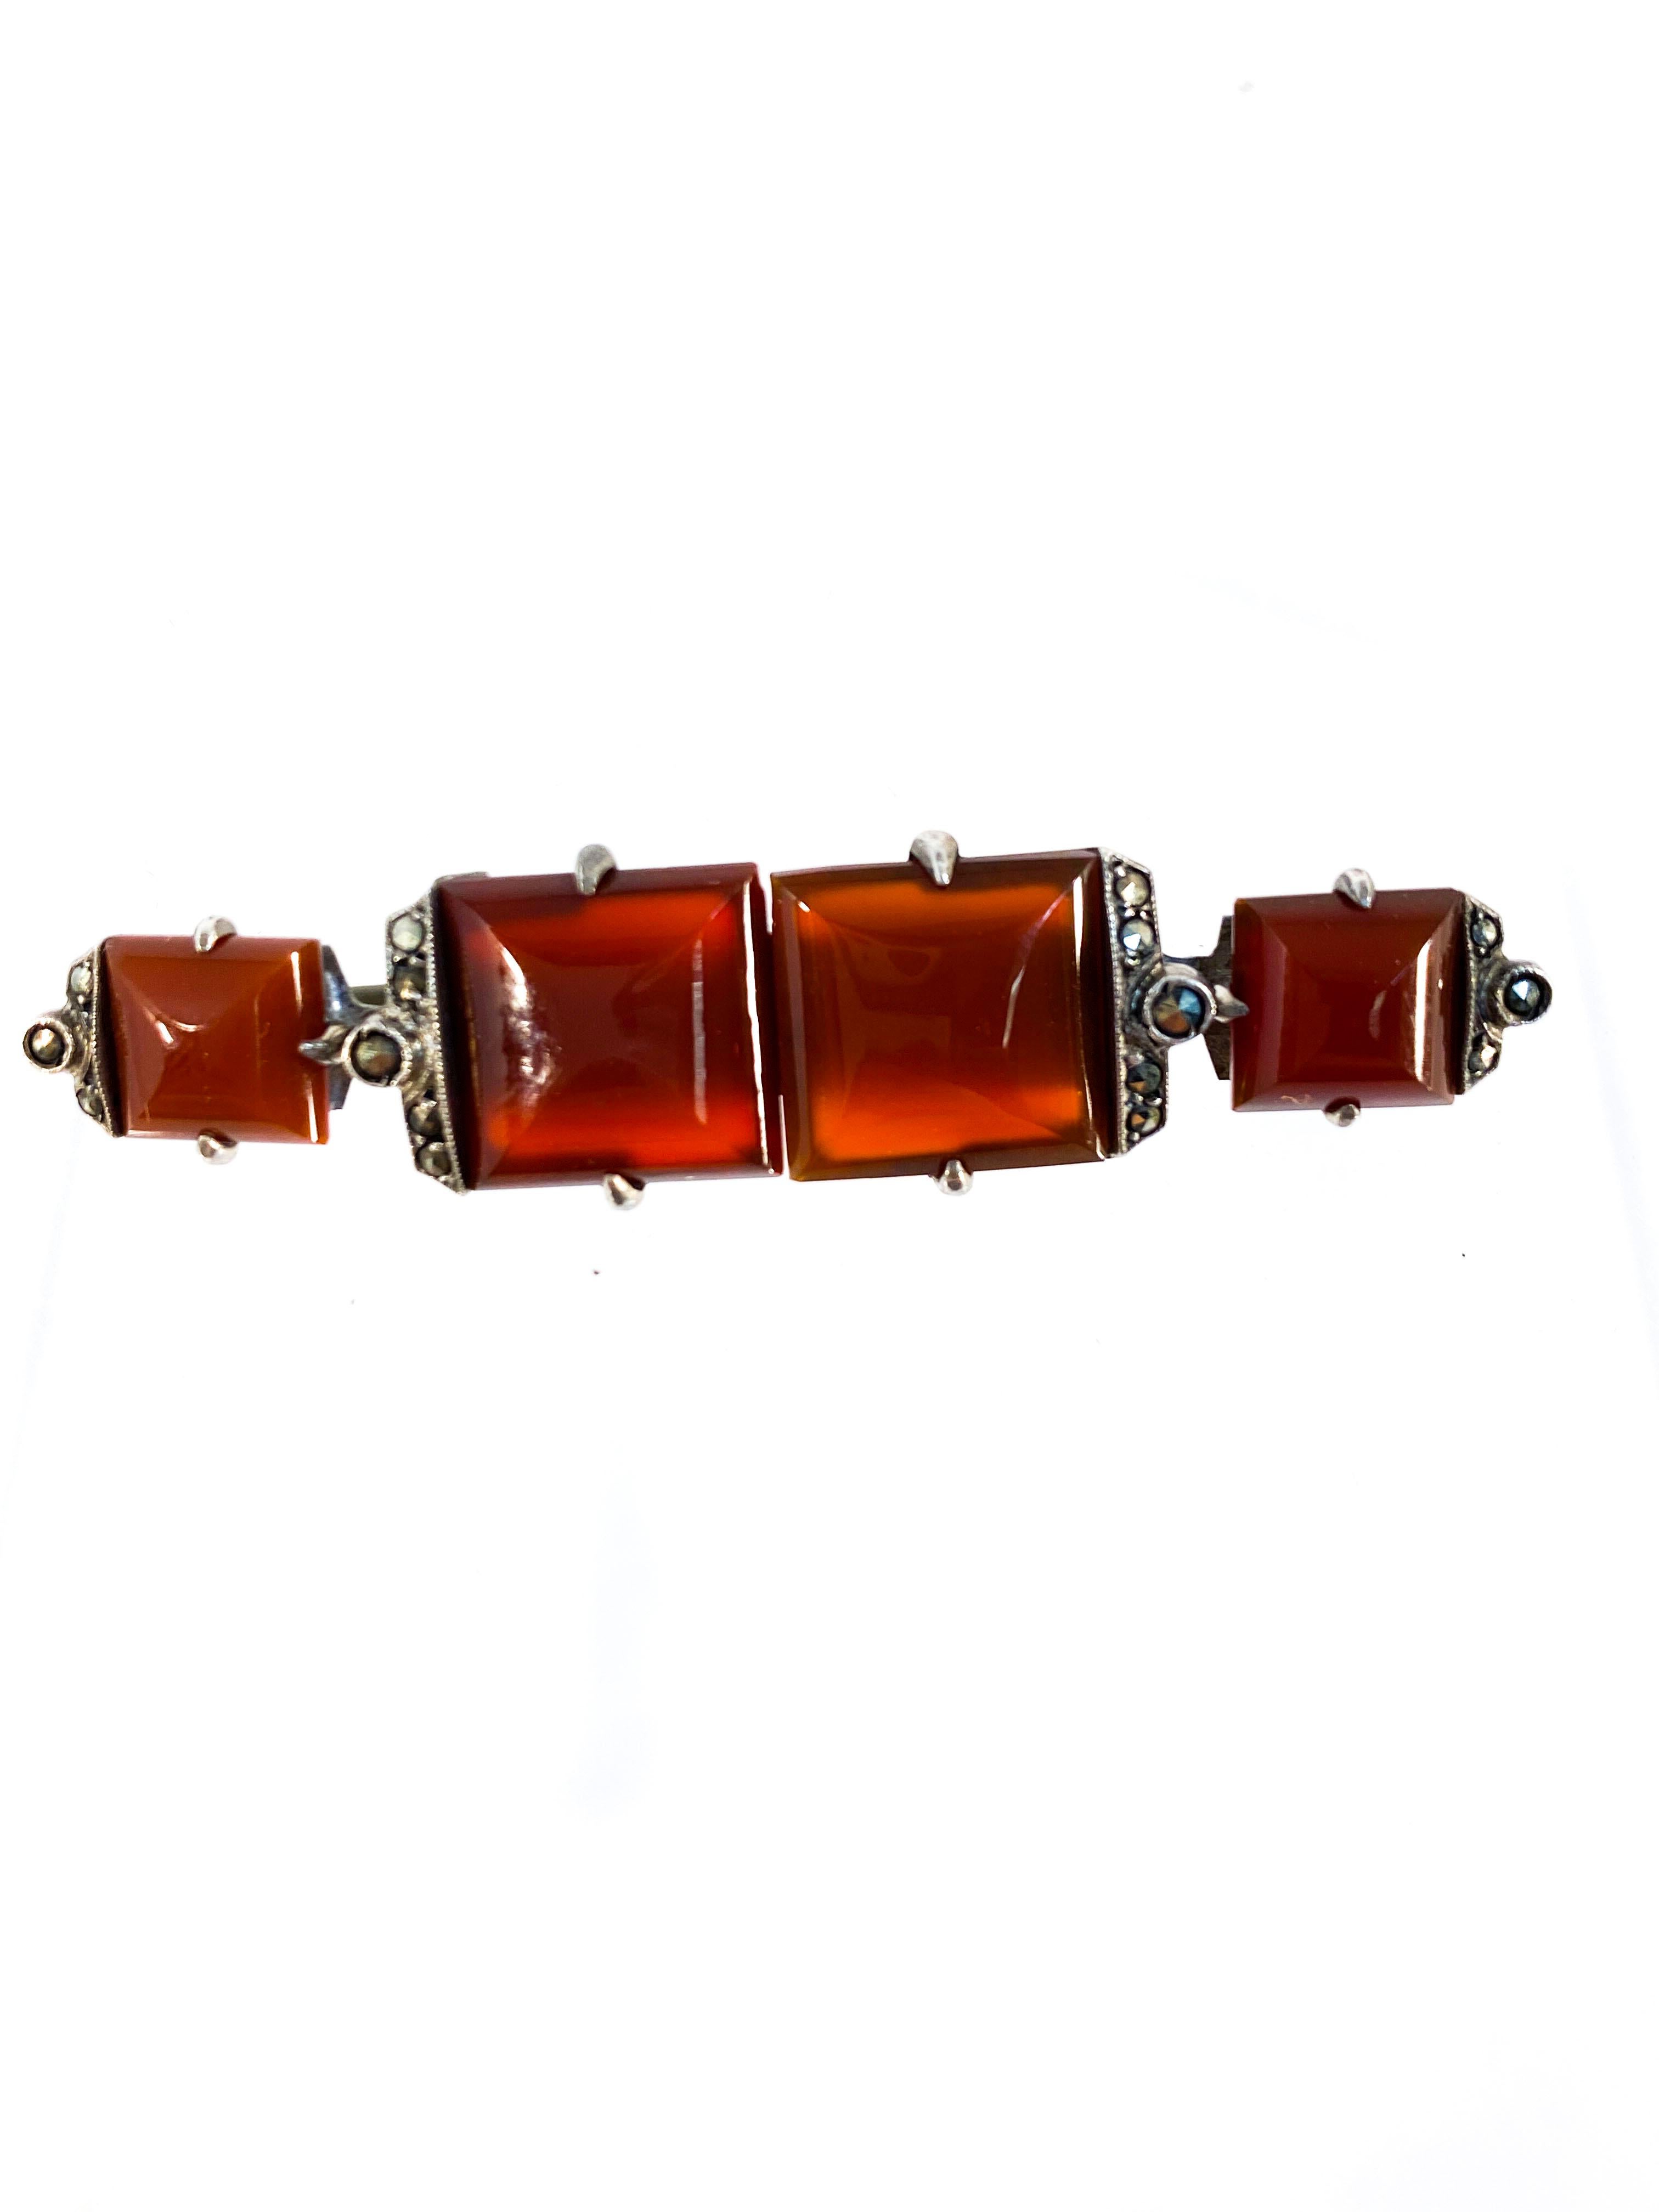 1930s Depression era carnelian pin with marcasite accents all set in sterling silver. The back has a standard long pin and clasp.